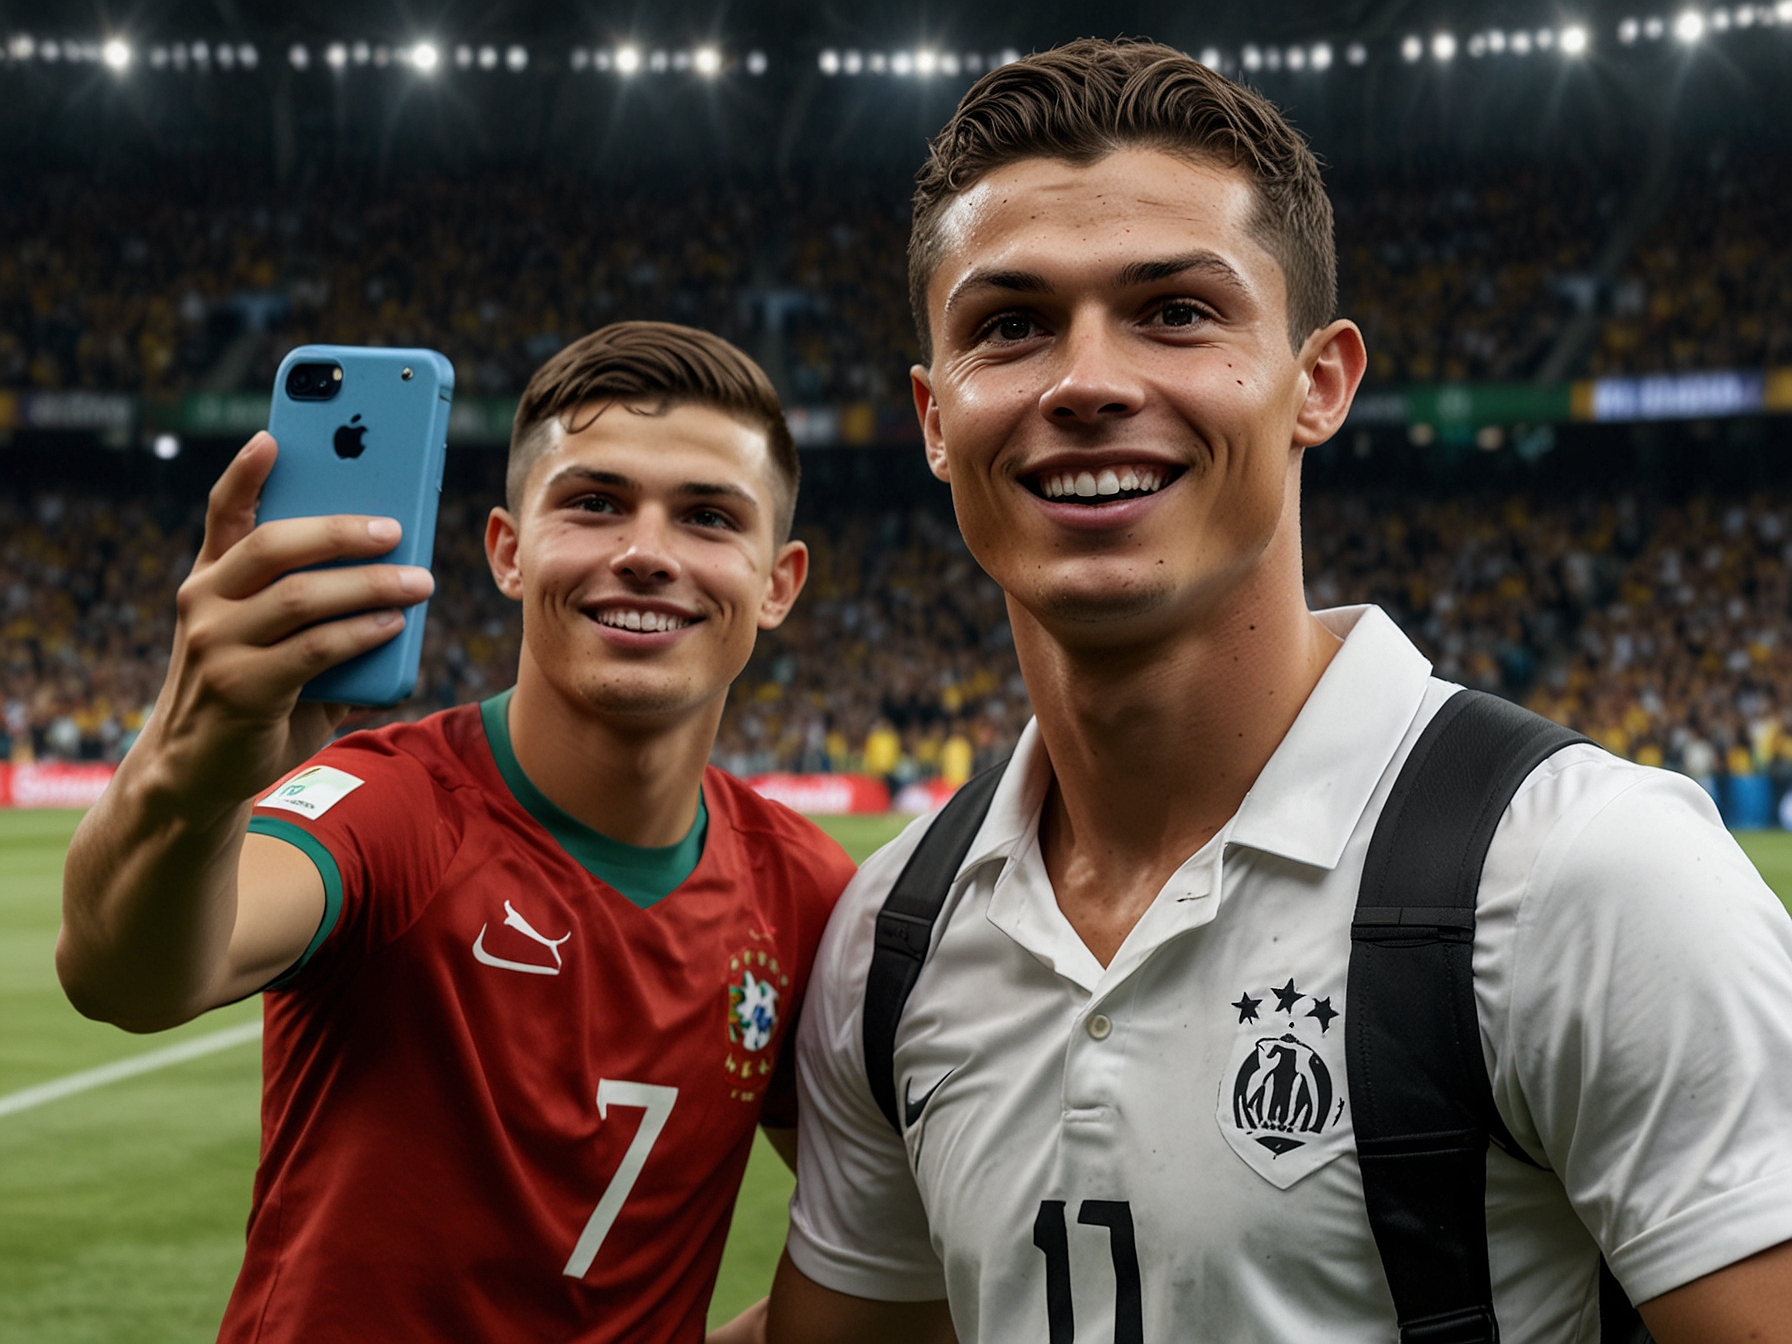 A young fan runs onto the field at Signal Iduna Park, excitedly approaching Cristiano Ronaldo with a smartphone for a selfie during the Euro 2024 match between Portugal and Turkey.